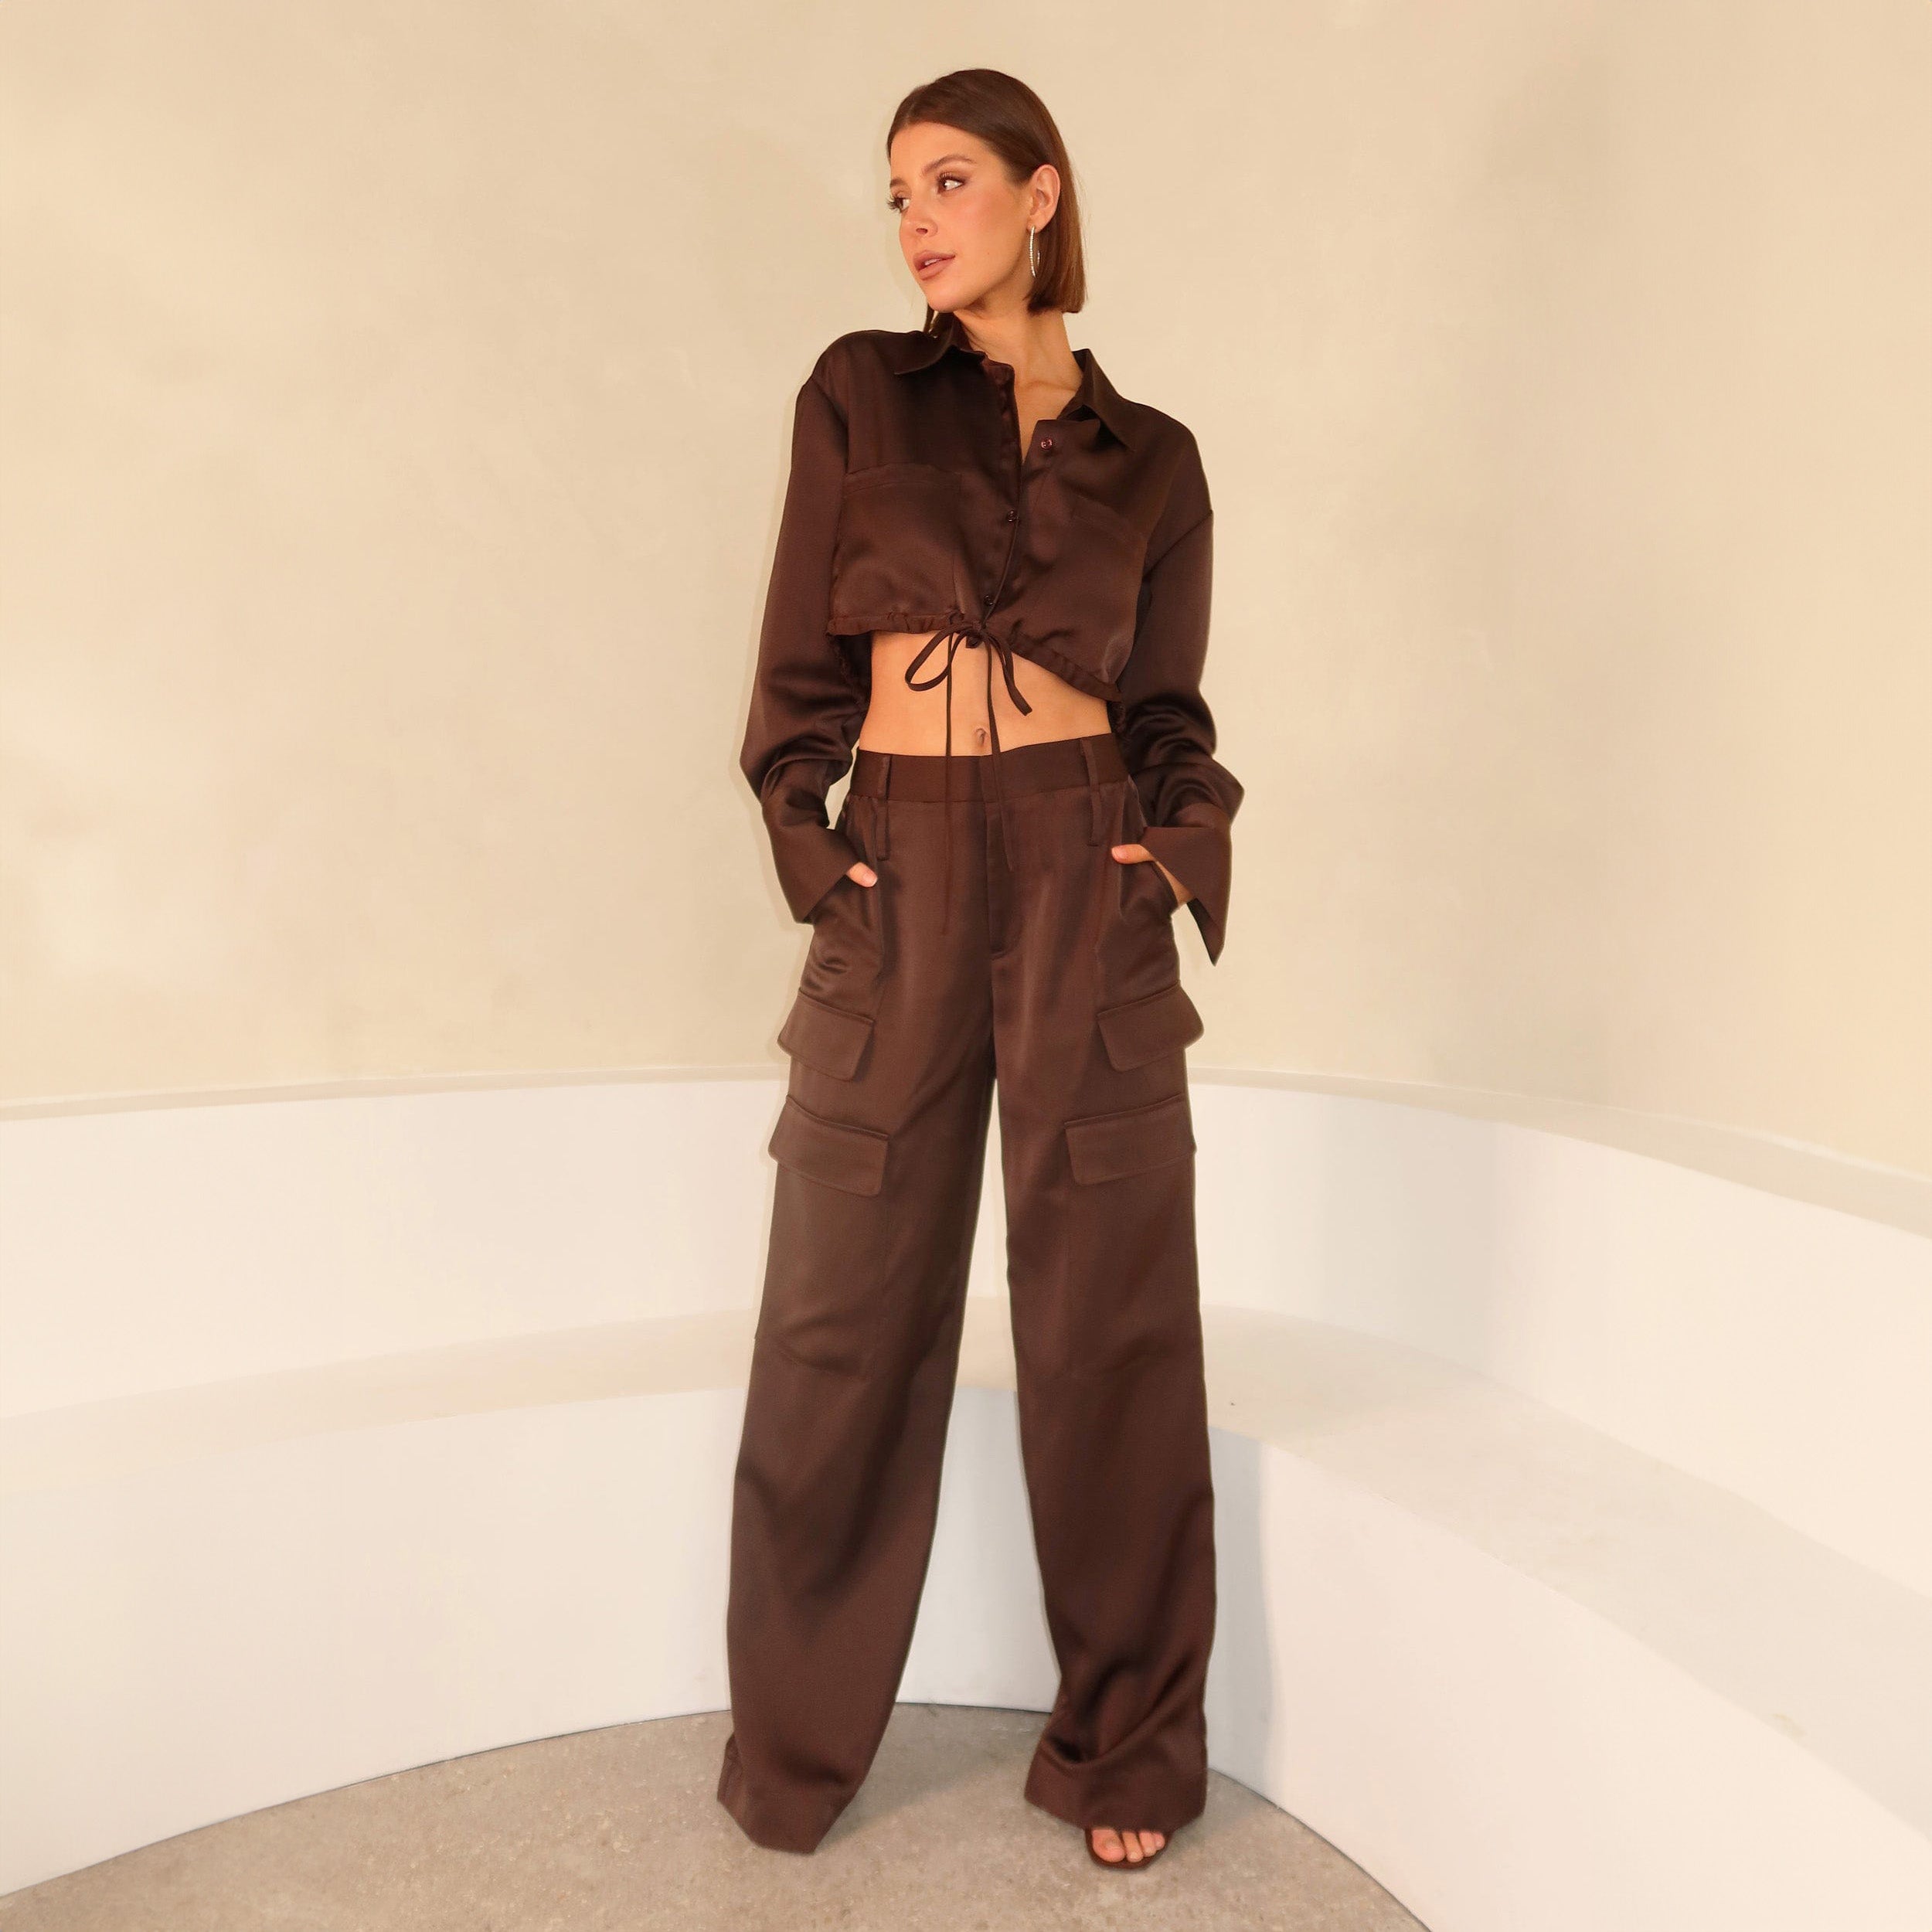 Full view of woman wearing Brown Satin Milan Pant features Mid-rise with side pockets and cargo detail. Luxurious and structured satin-like fabric. 